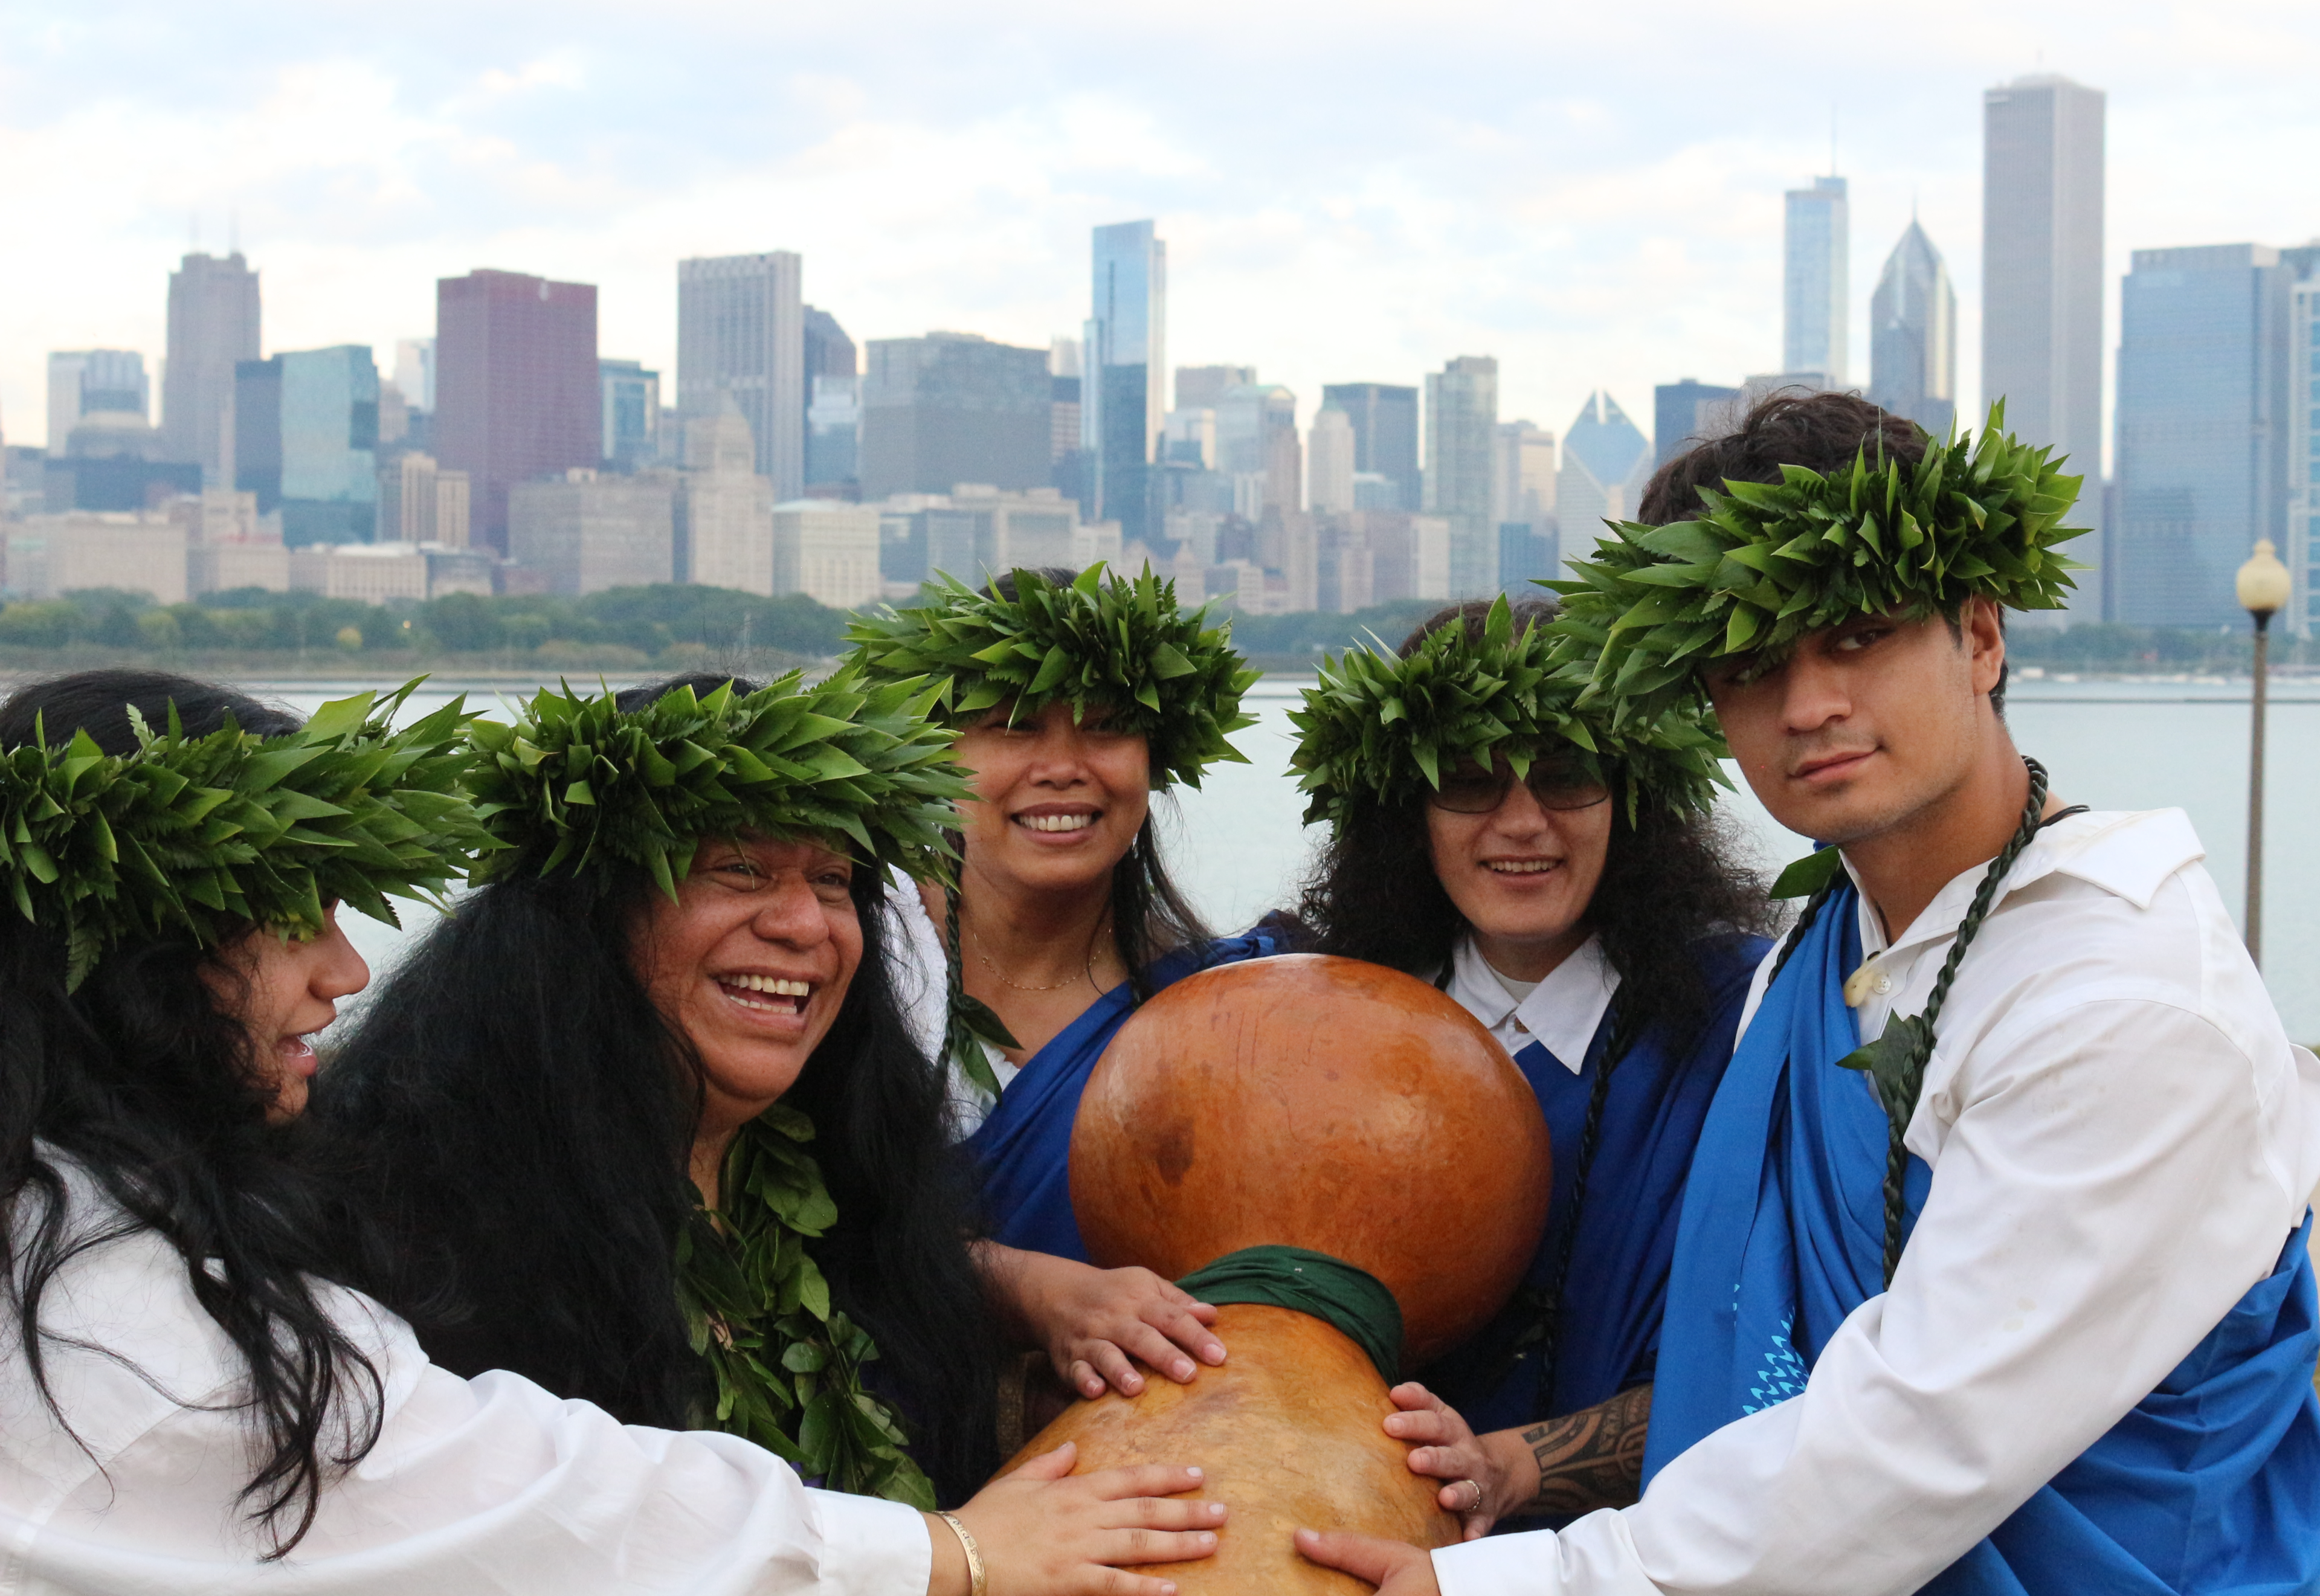 Five Hula practitioners, gathered together in front of the Chicago skyline.